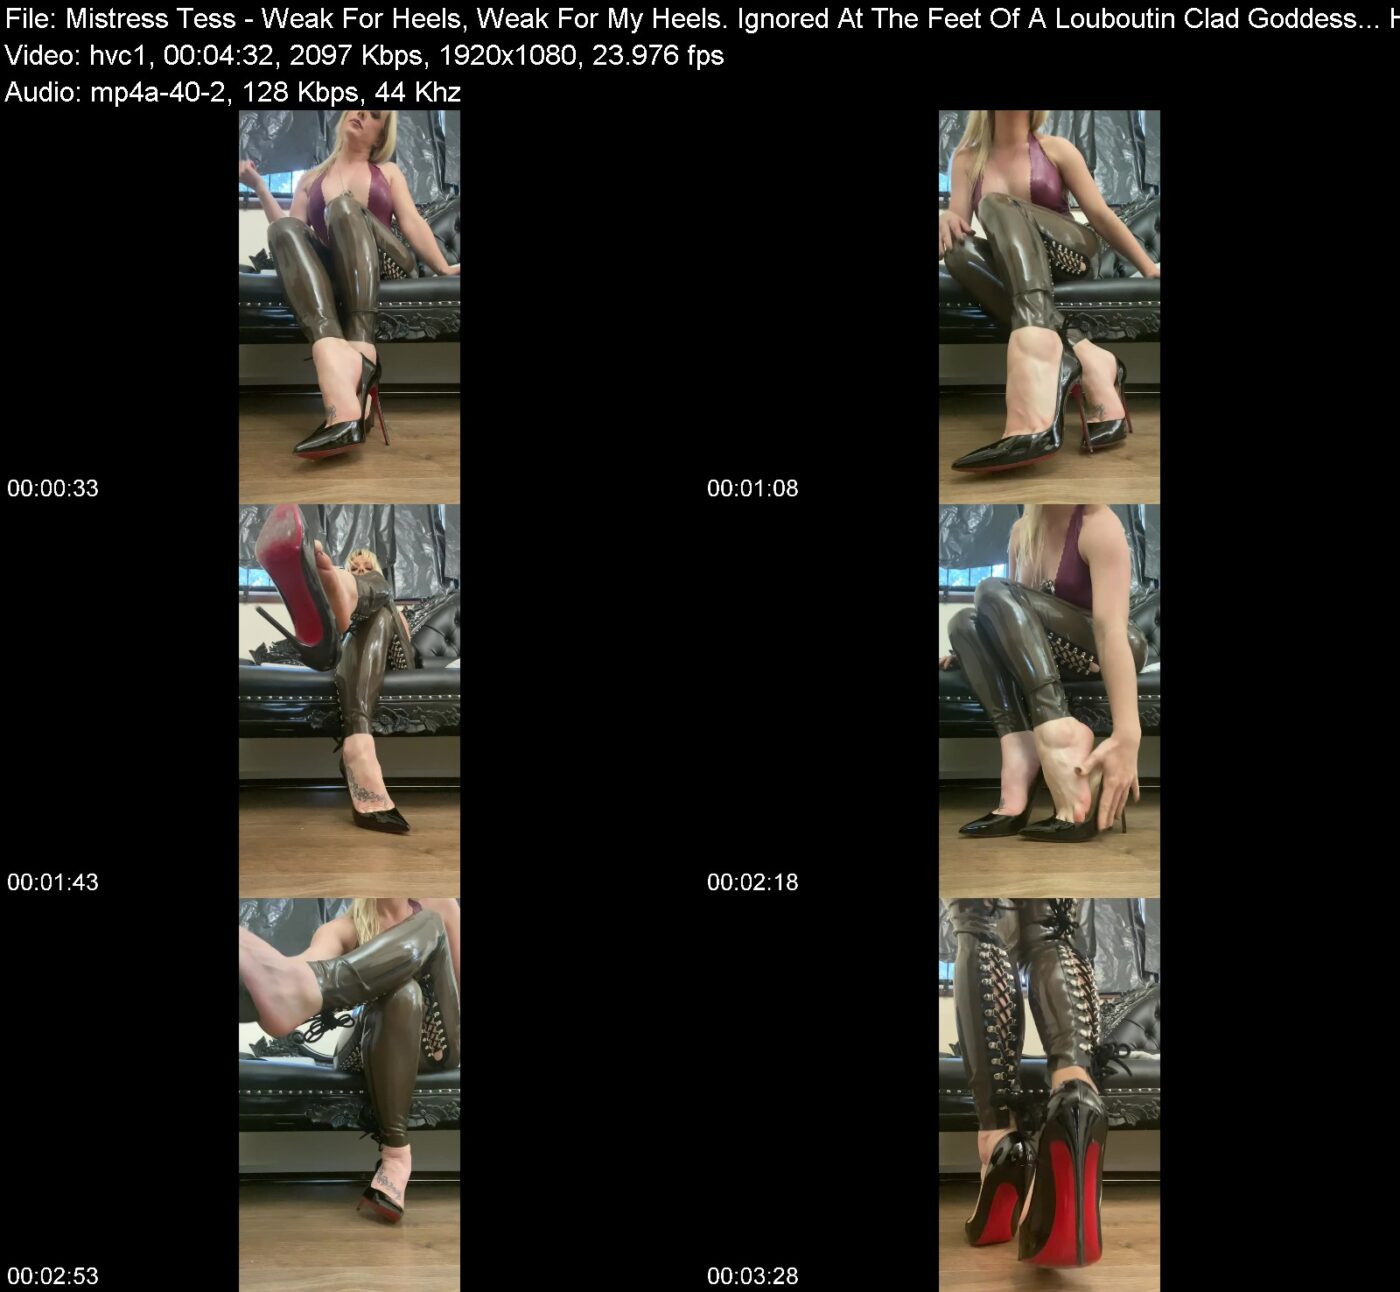 Actress: Mistress Tess. Title and Studio: Weak For Heels, Weak For My Heels. Ignored At The Feet Of A Louboutin Clad Goddess… Hypn